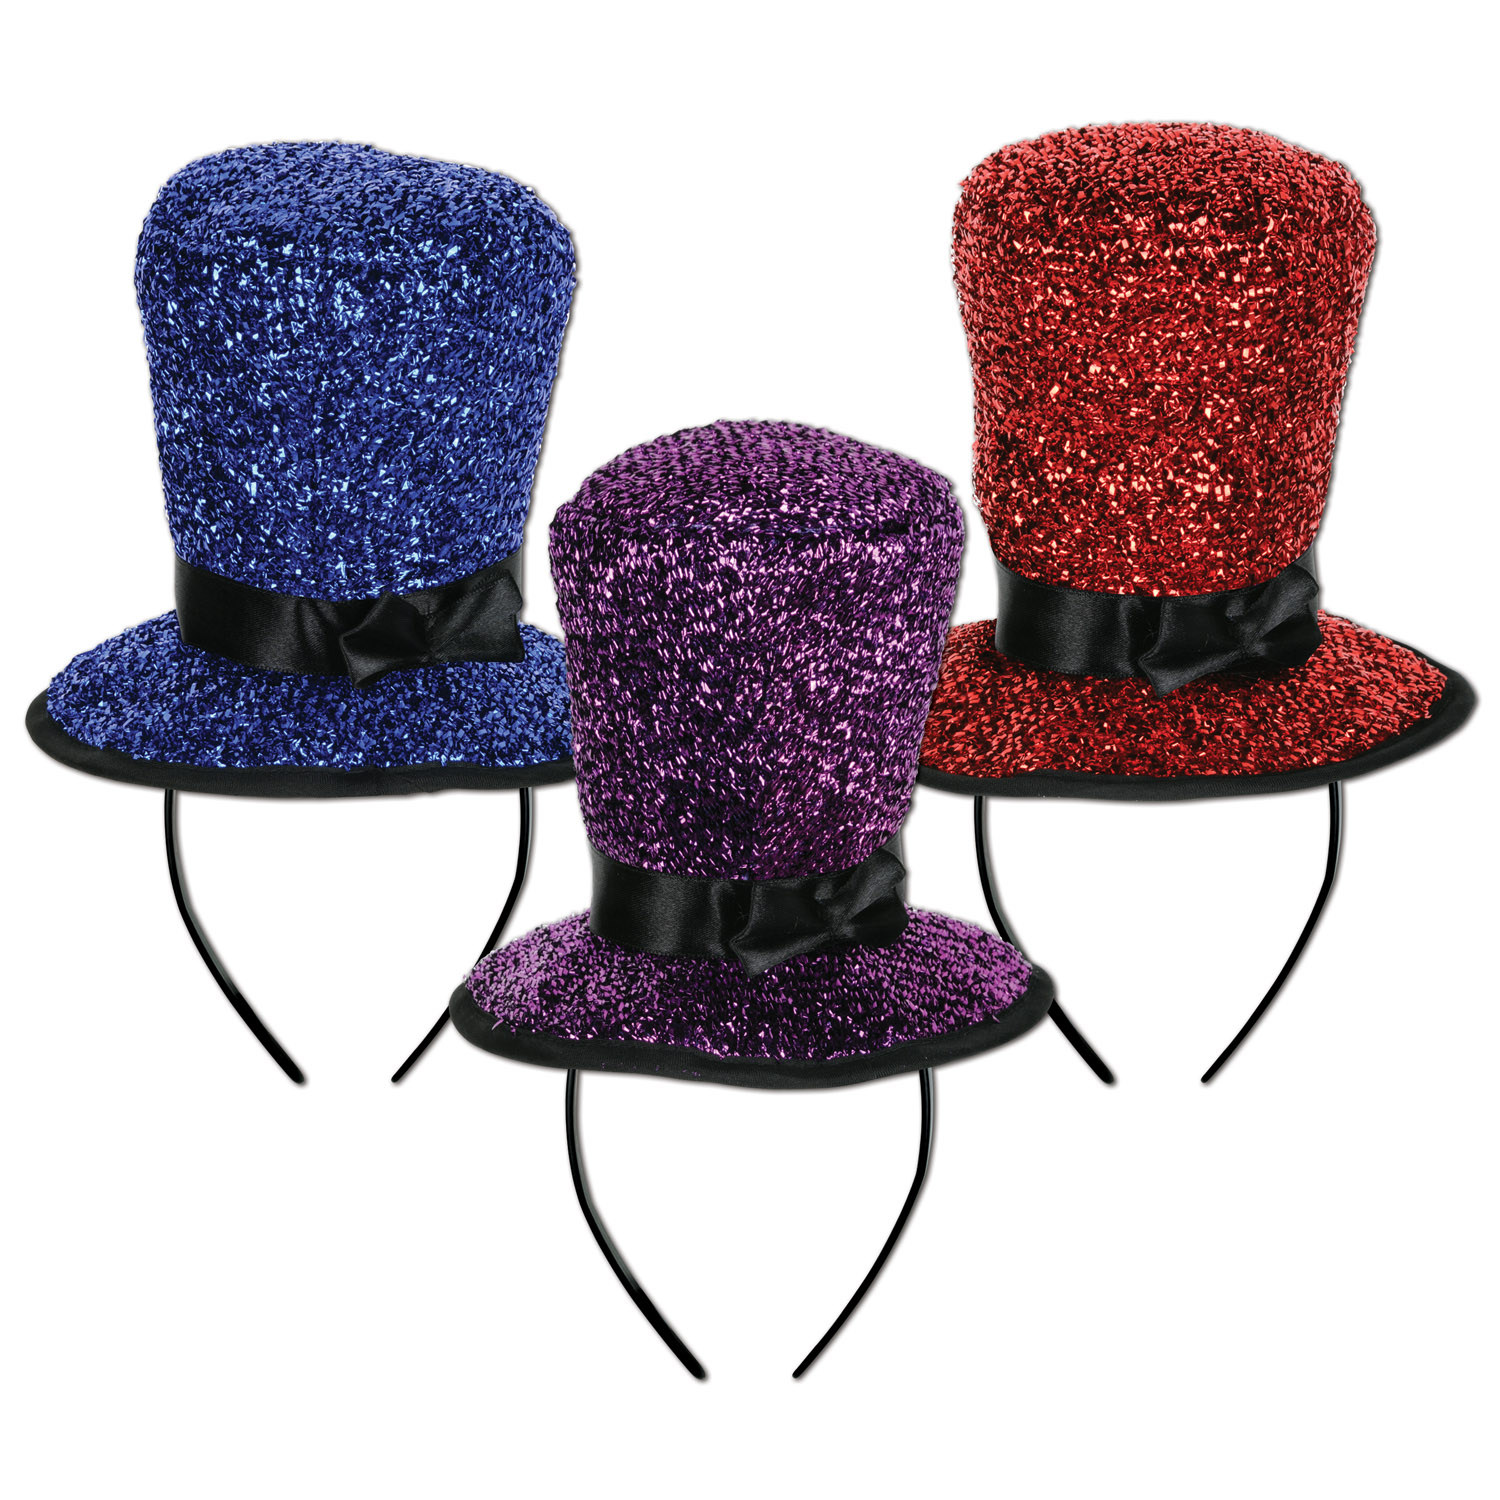 Plush marterial top hat in either blue, purple or red attached to a black headband.